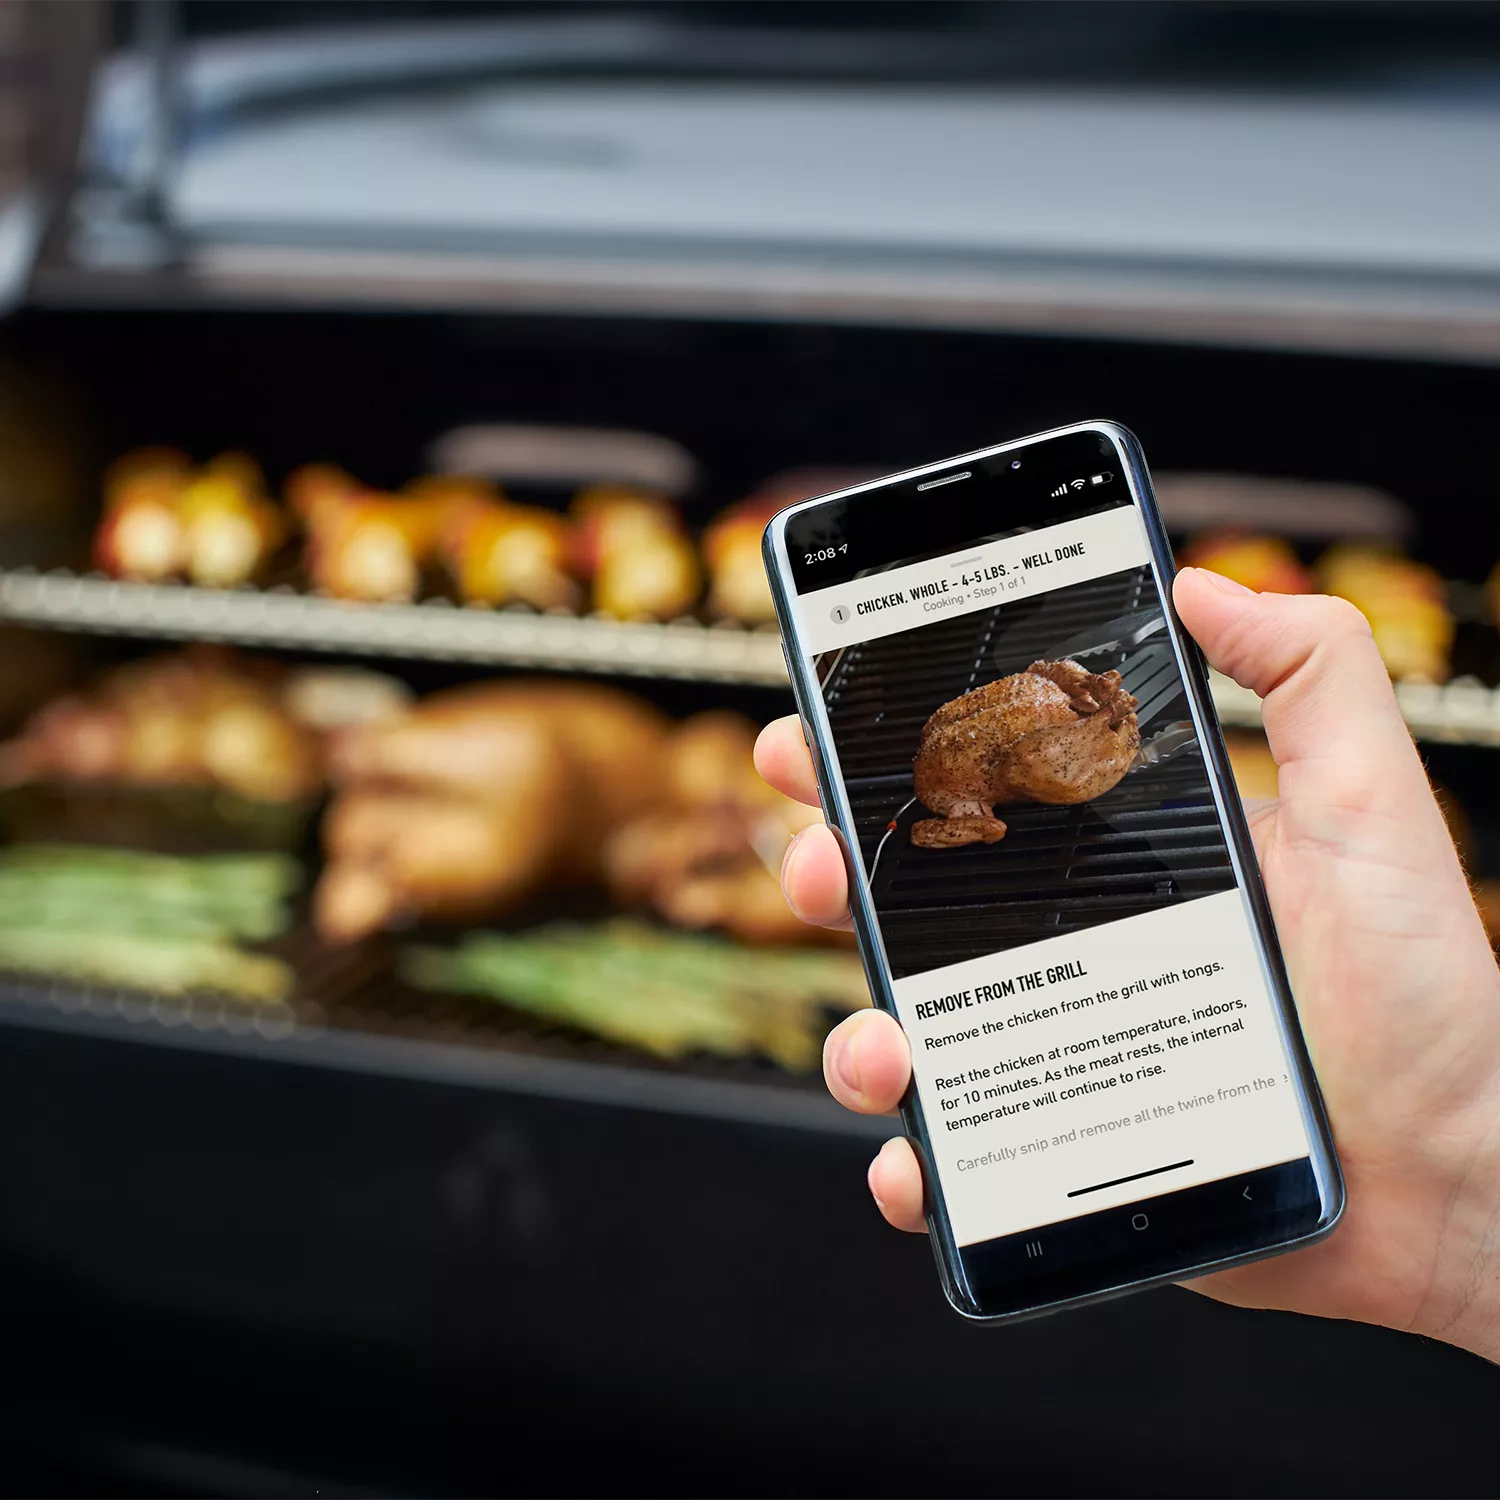 Weber Connect Smart Grilling Hub Review & Setup Install mobile App Guide  bbq learn how to 